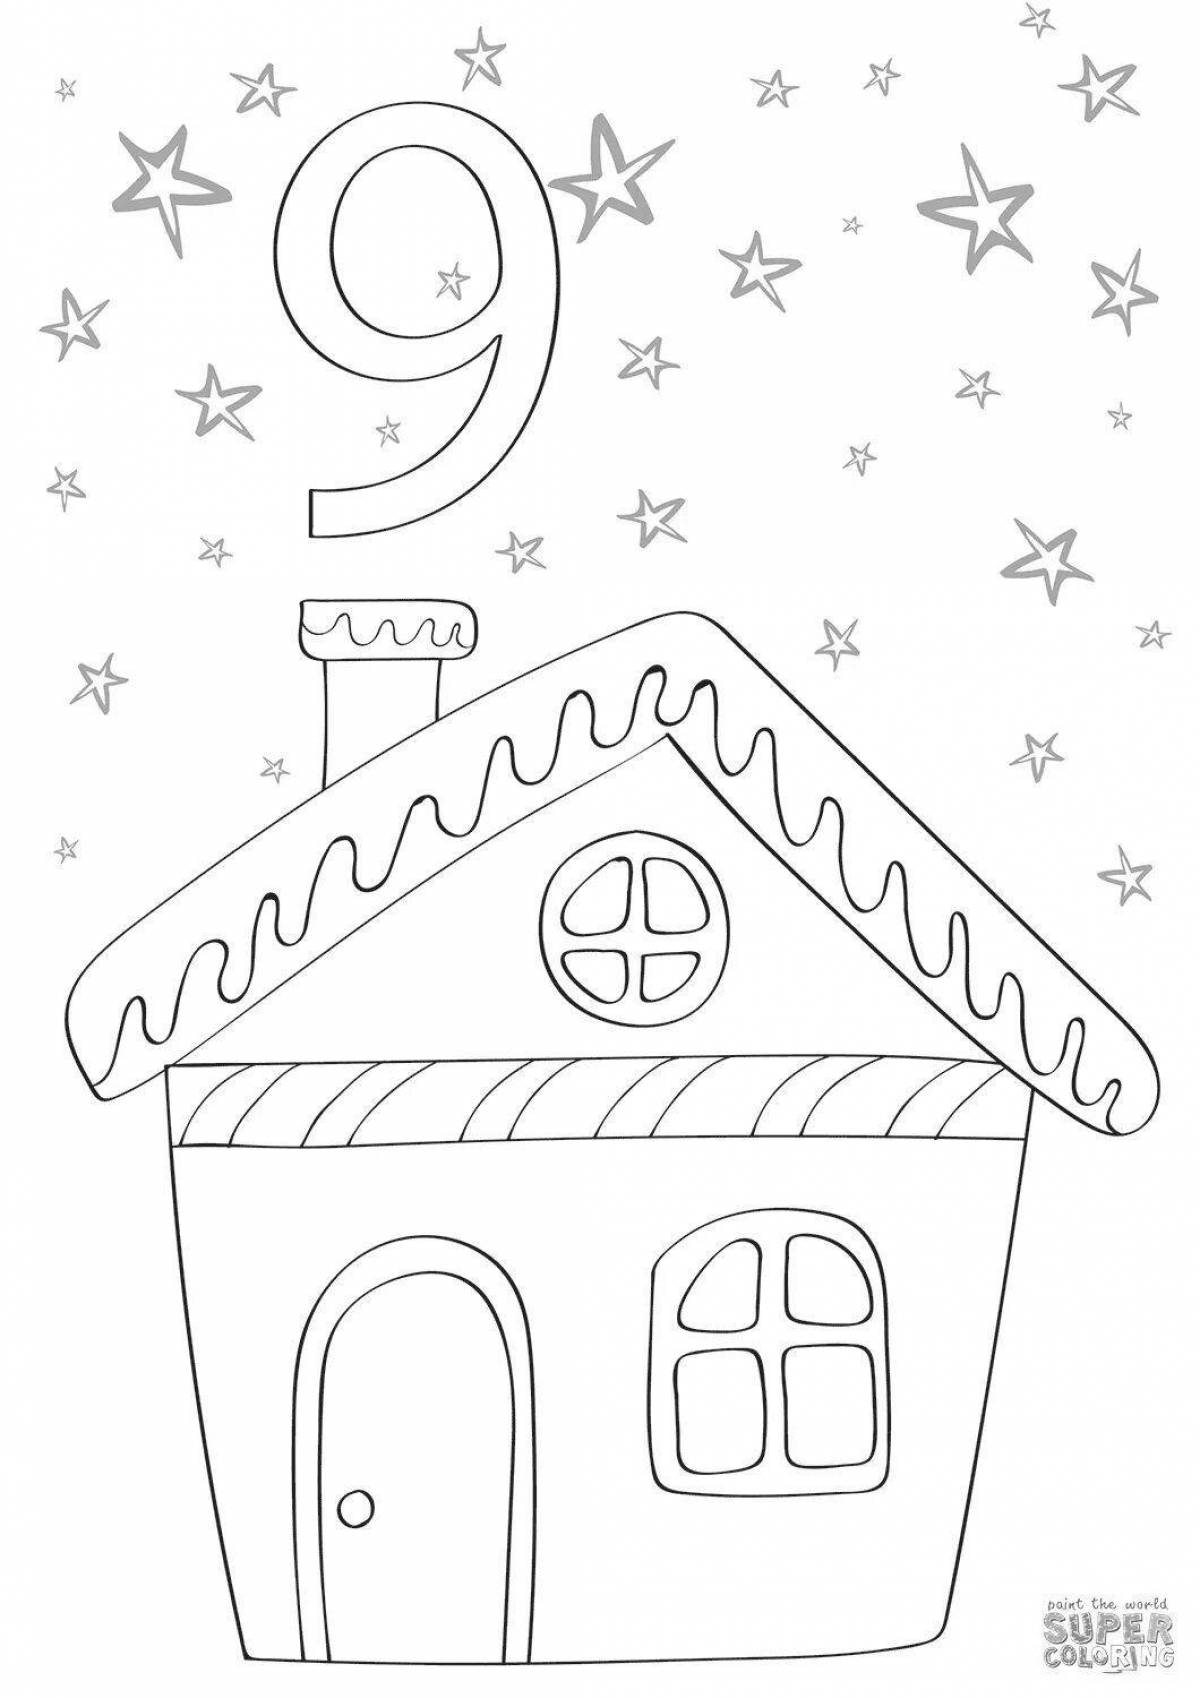 Violent winter house coloring pages for kids